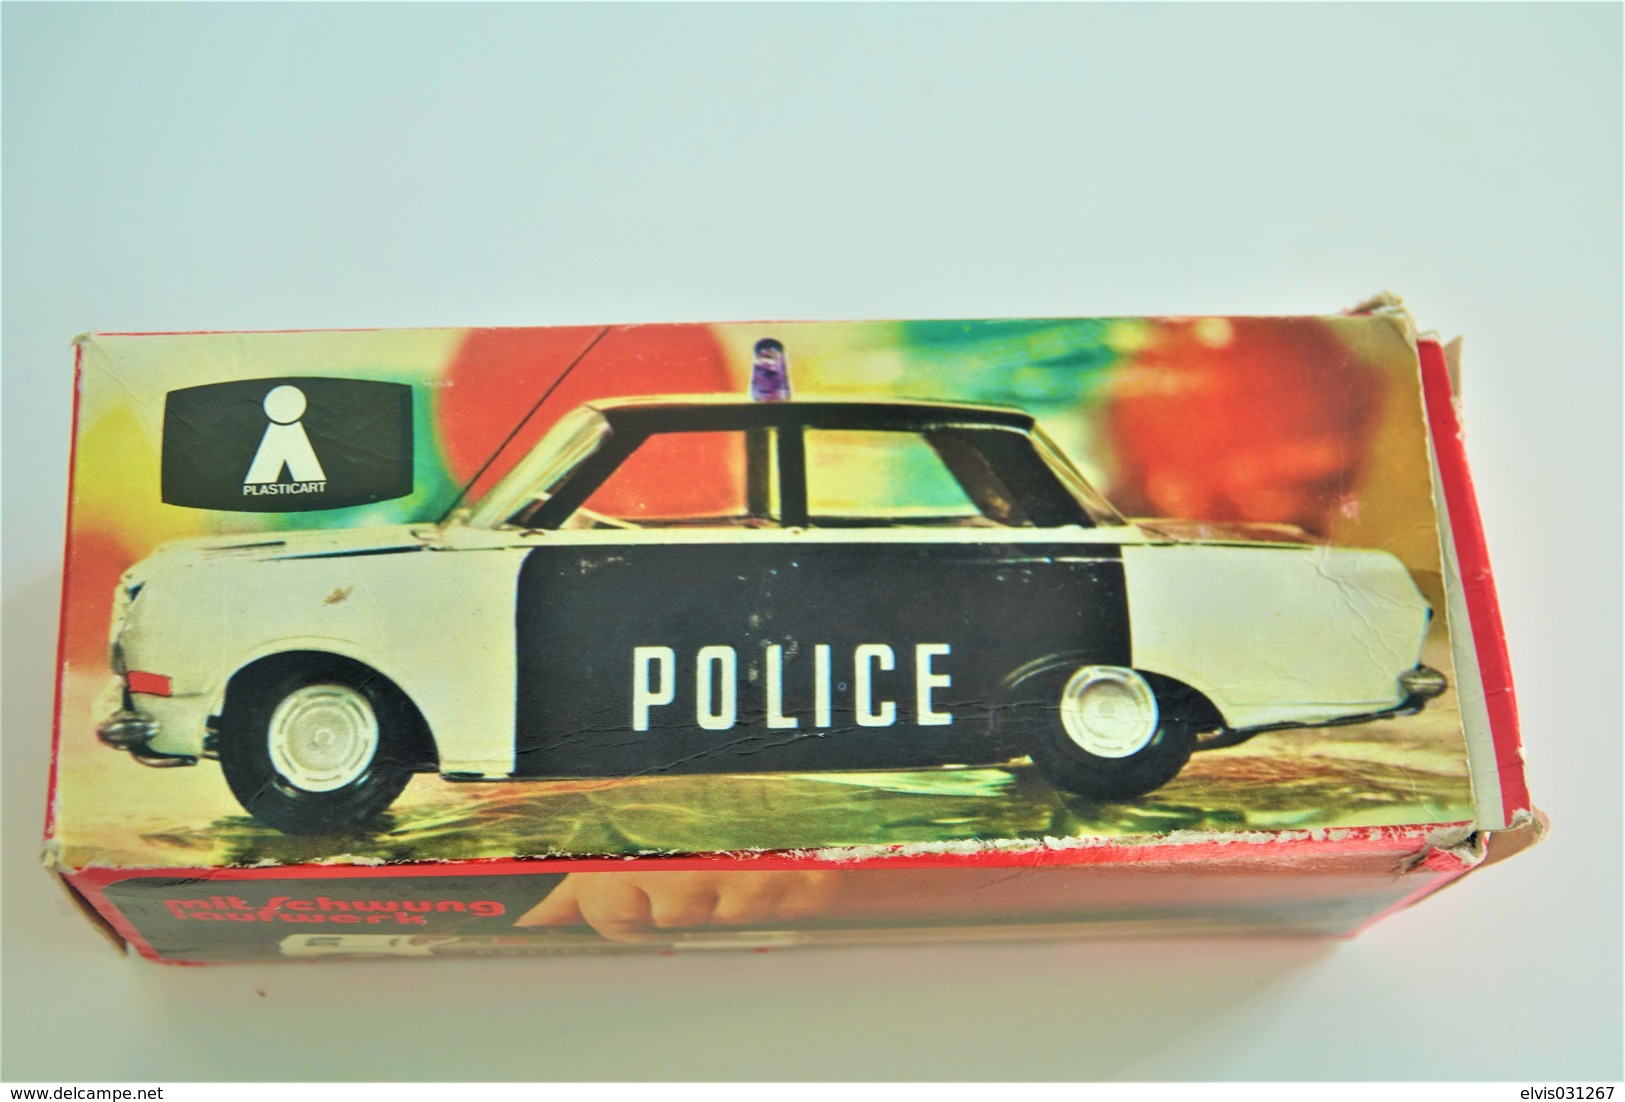 Vintage TIN TOY CAR : mark PLASTICART with BOX - Police Car - 15cm - DDR GDR GERMANY- 1960's - Friction Powered